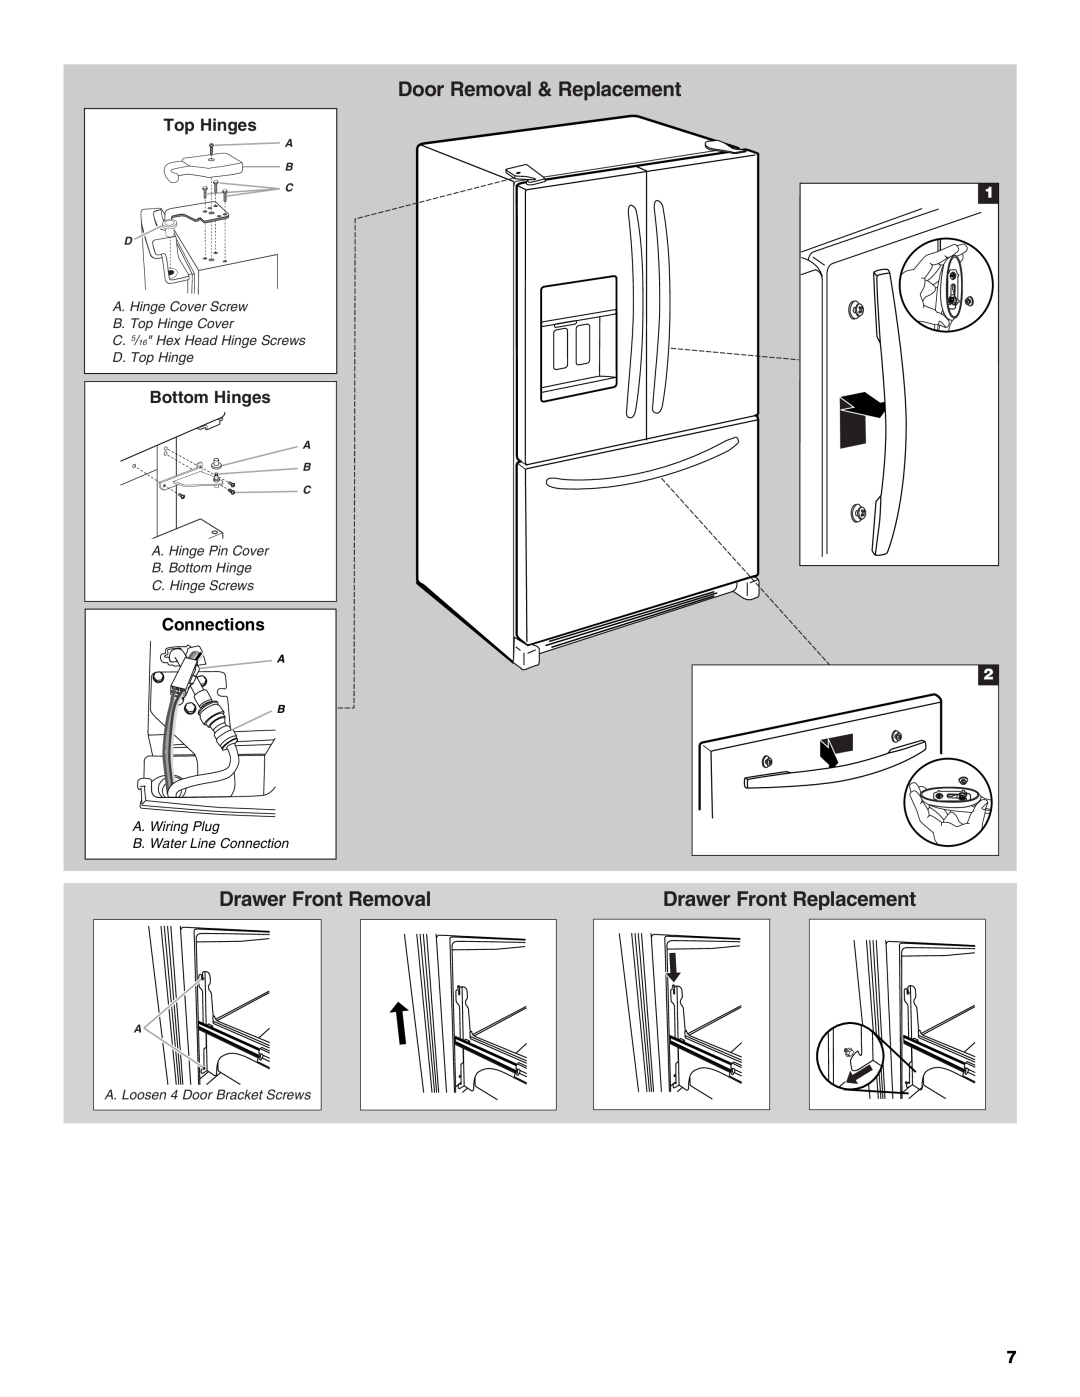 Maytag UKF8001AXX-200 Door Removal & Replacement, Drawer Front Removal, Drawer Front Replacement, Top Hinges, Connections 